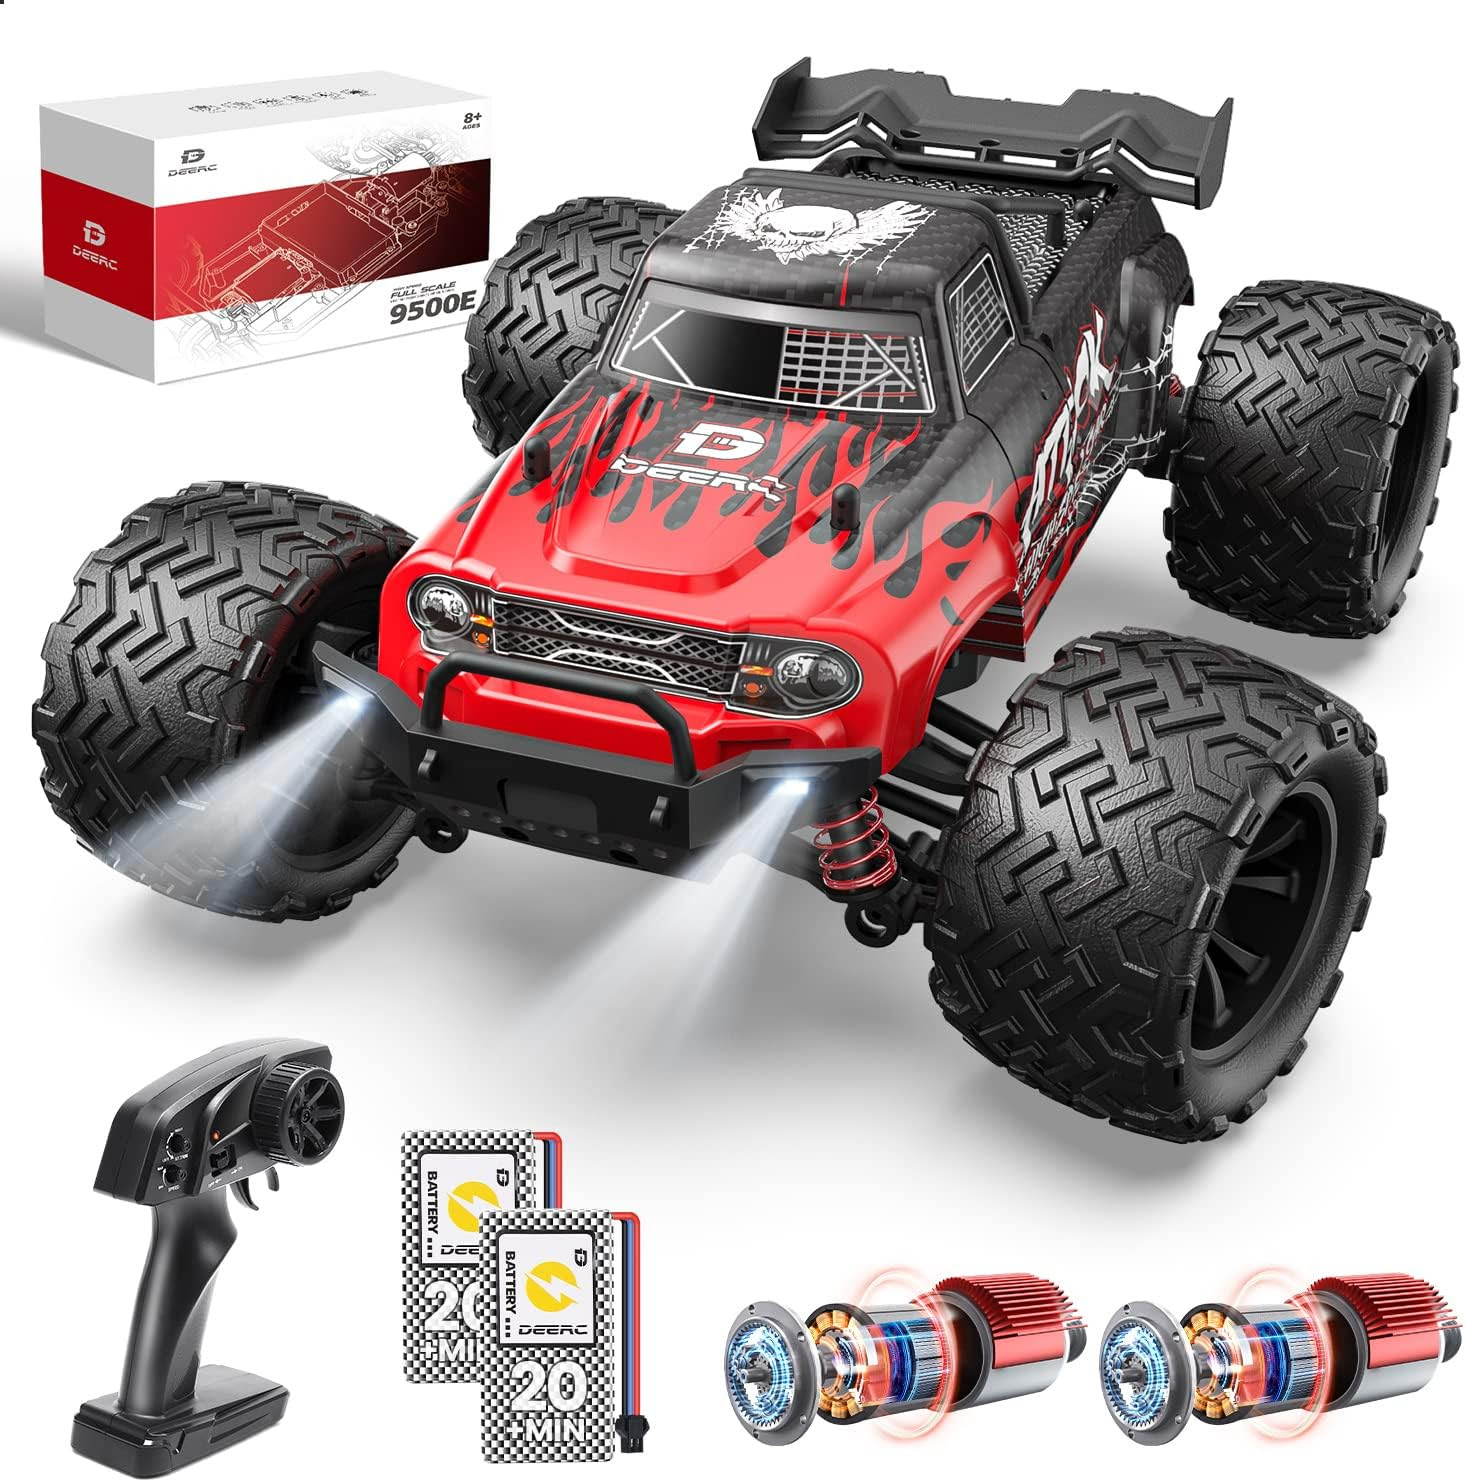 DEERC 9300 Remote Control 4WD Truck Off-Road Monster Truck Toy.  720units. EXW Los Angeles $20.00 unit.